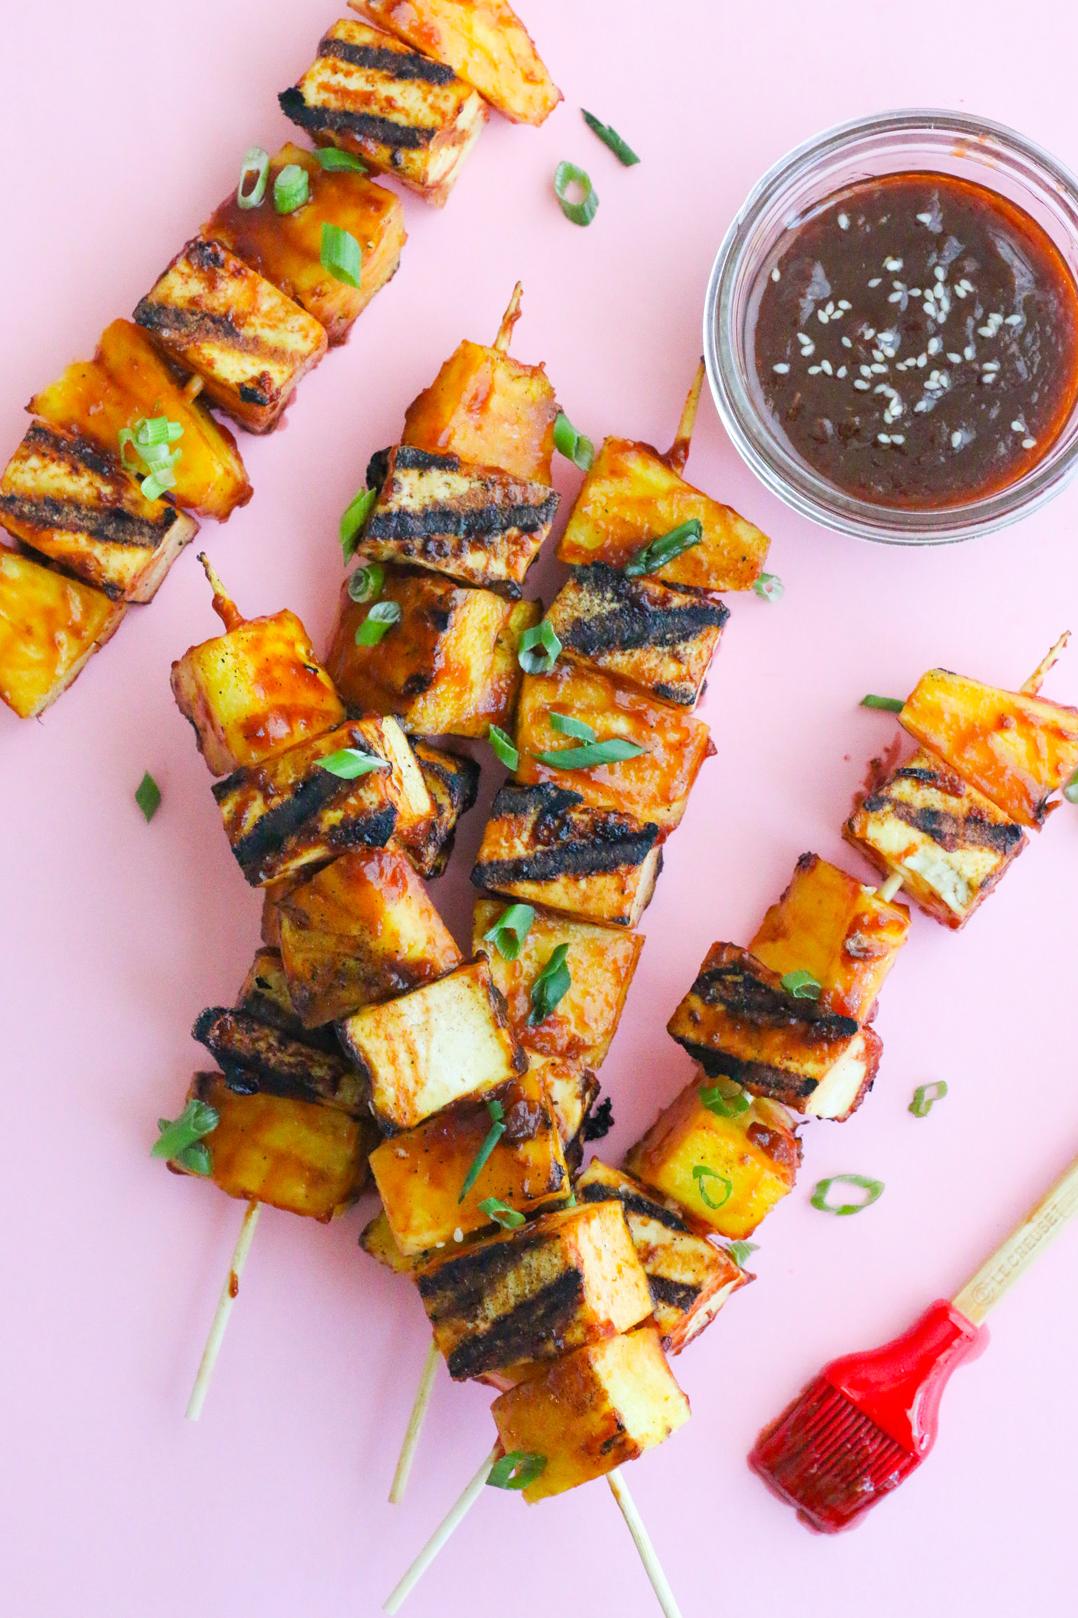  Who says kebabs have to be meat? These vegetarian skewers are packed with flavor